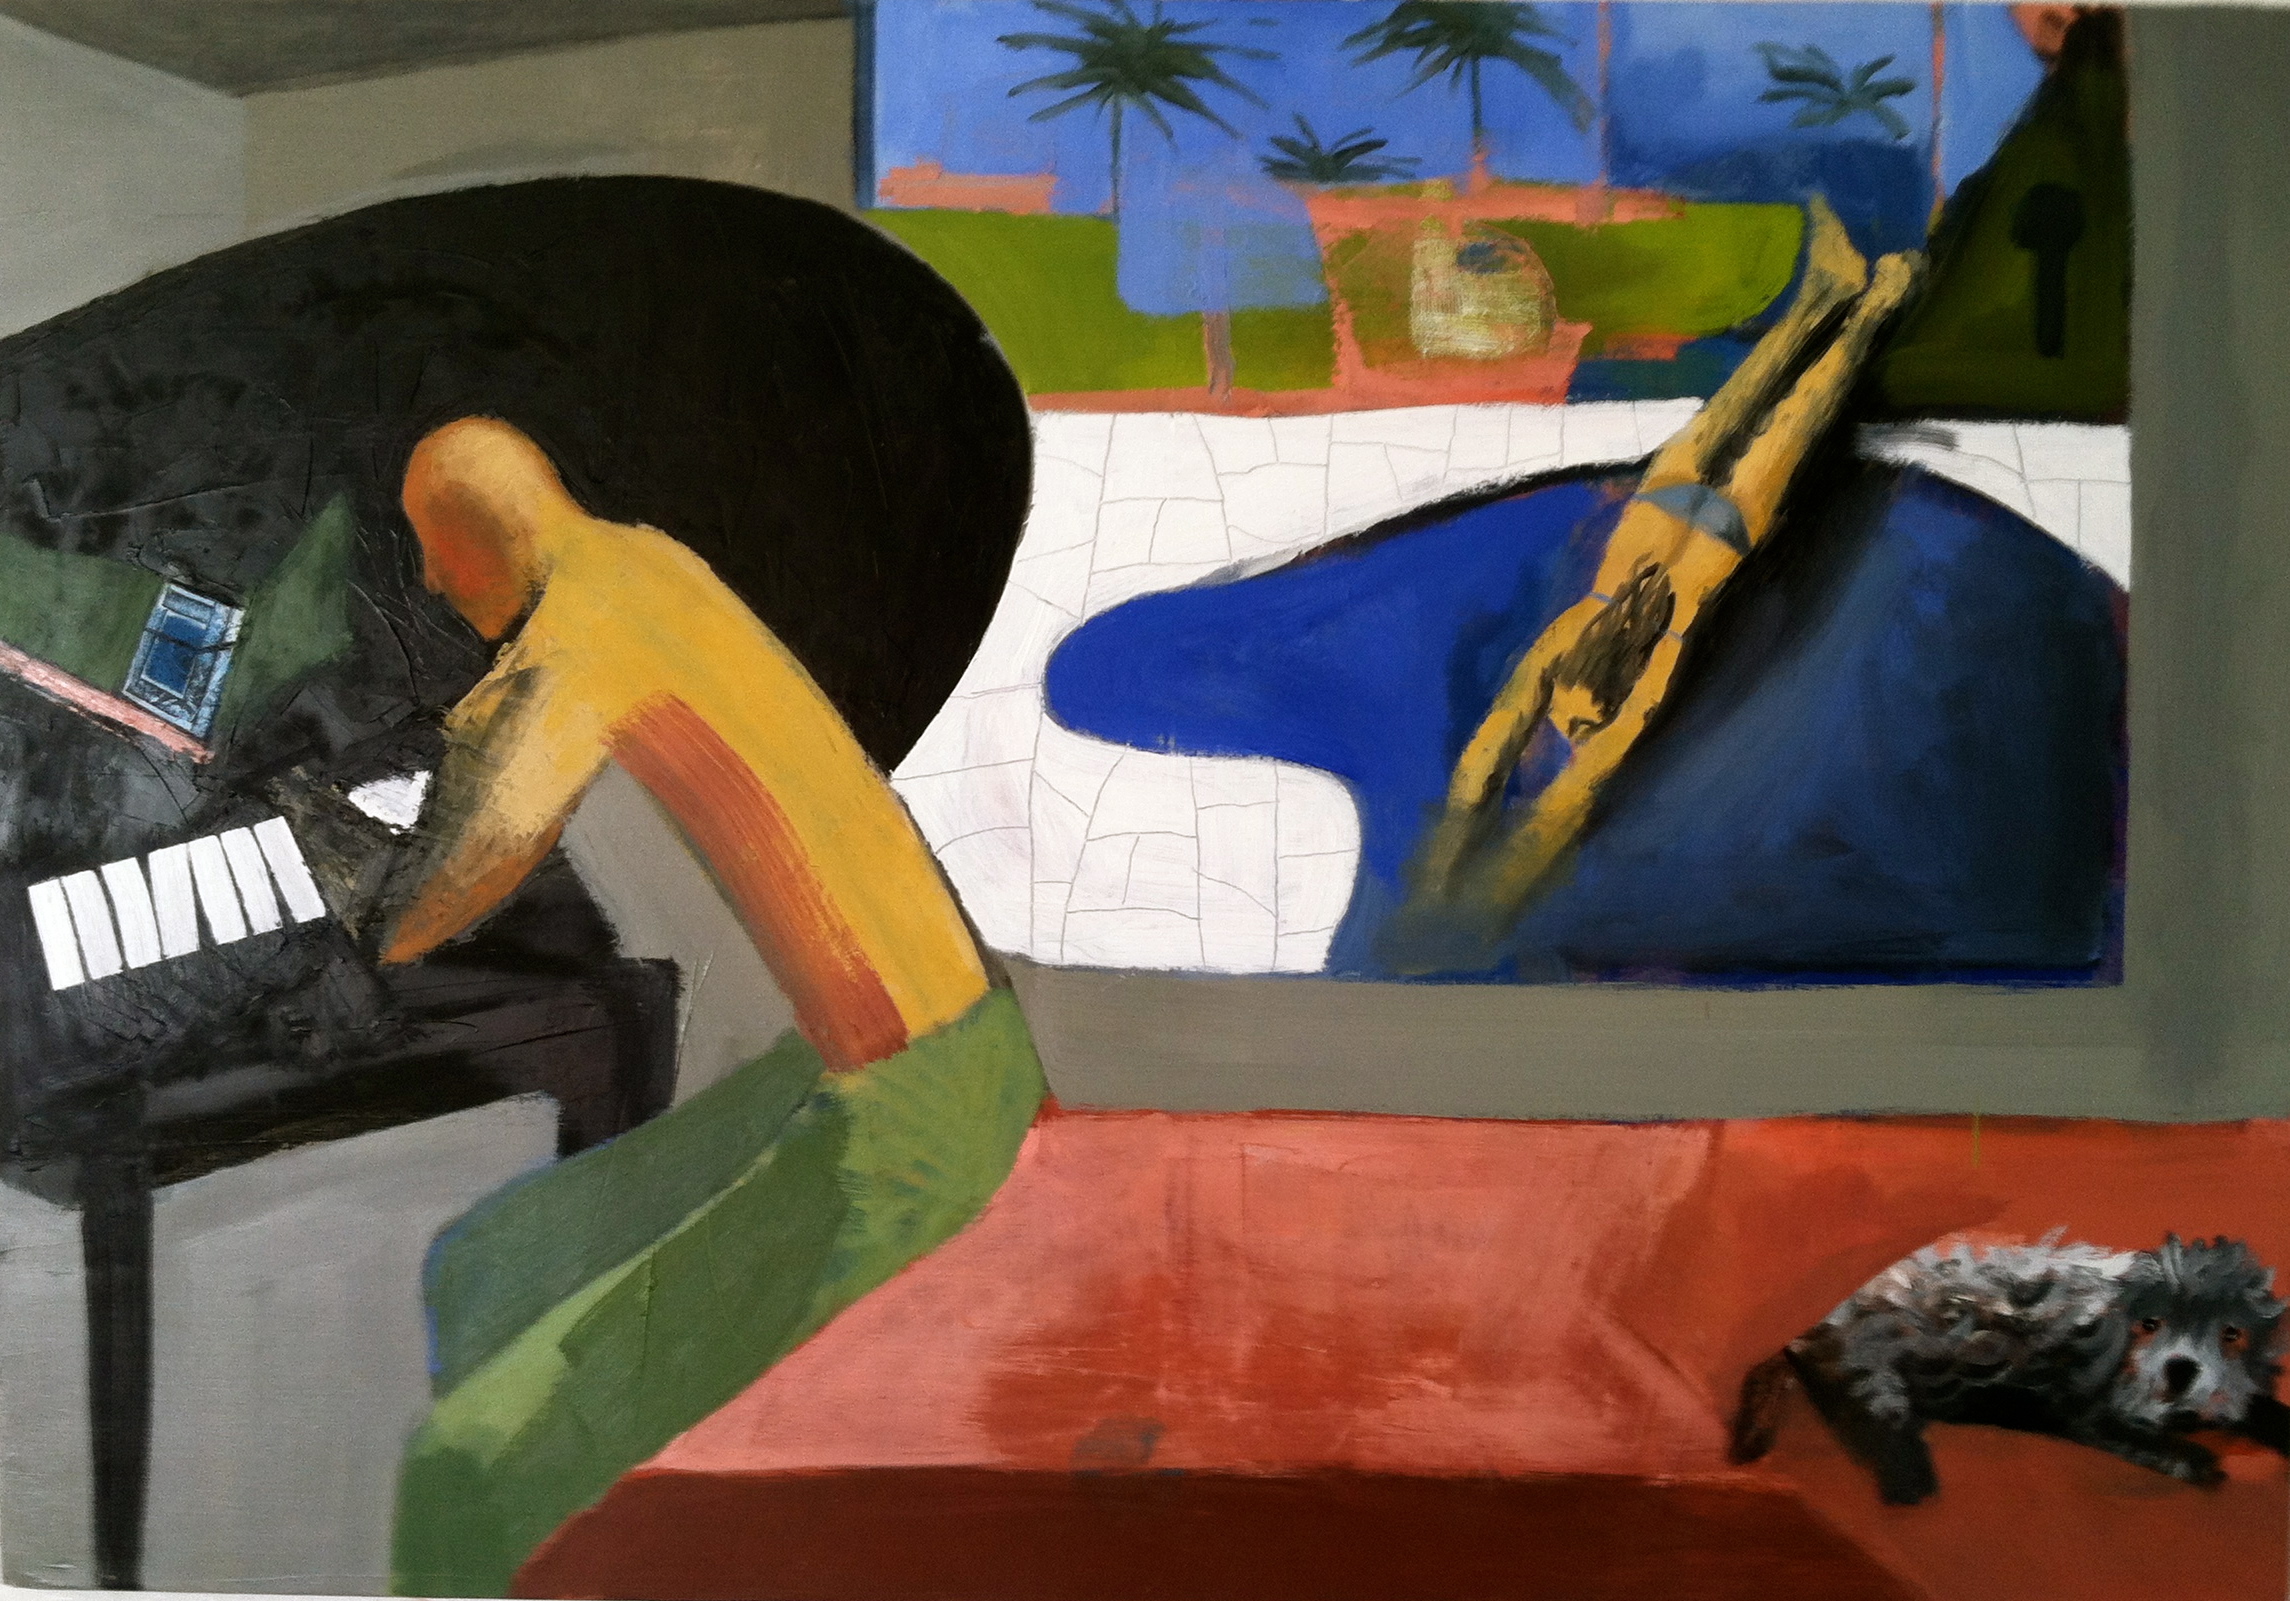  An artist in California, oil on canvas, 52x36 inches, 2014 